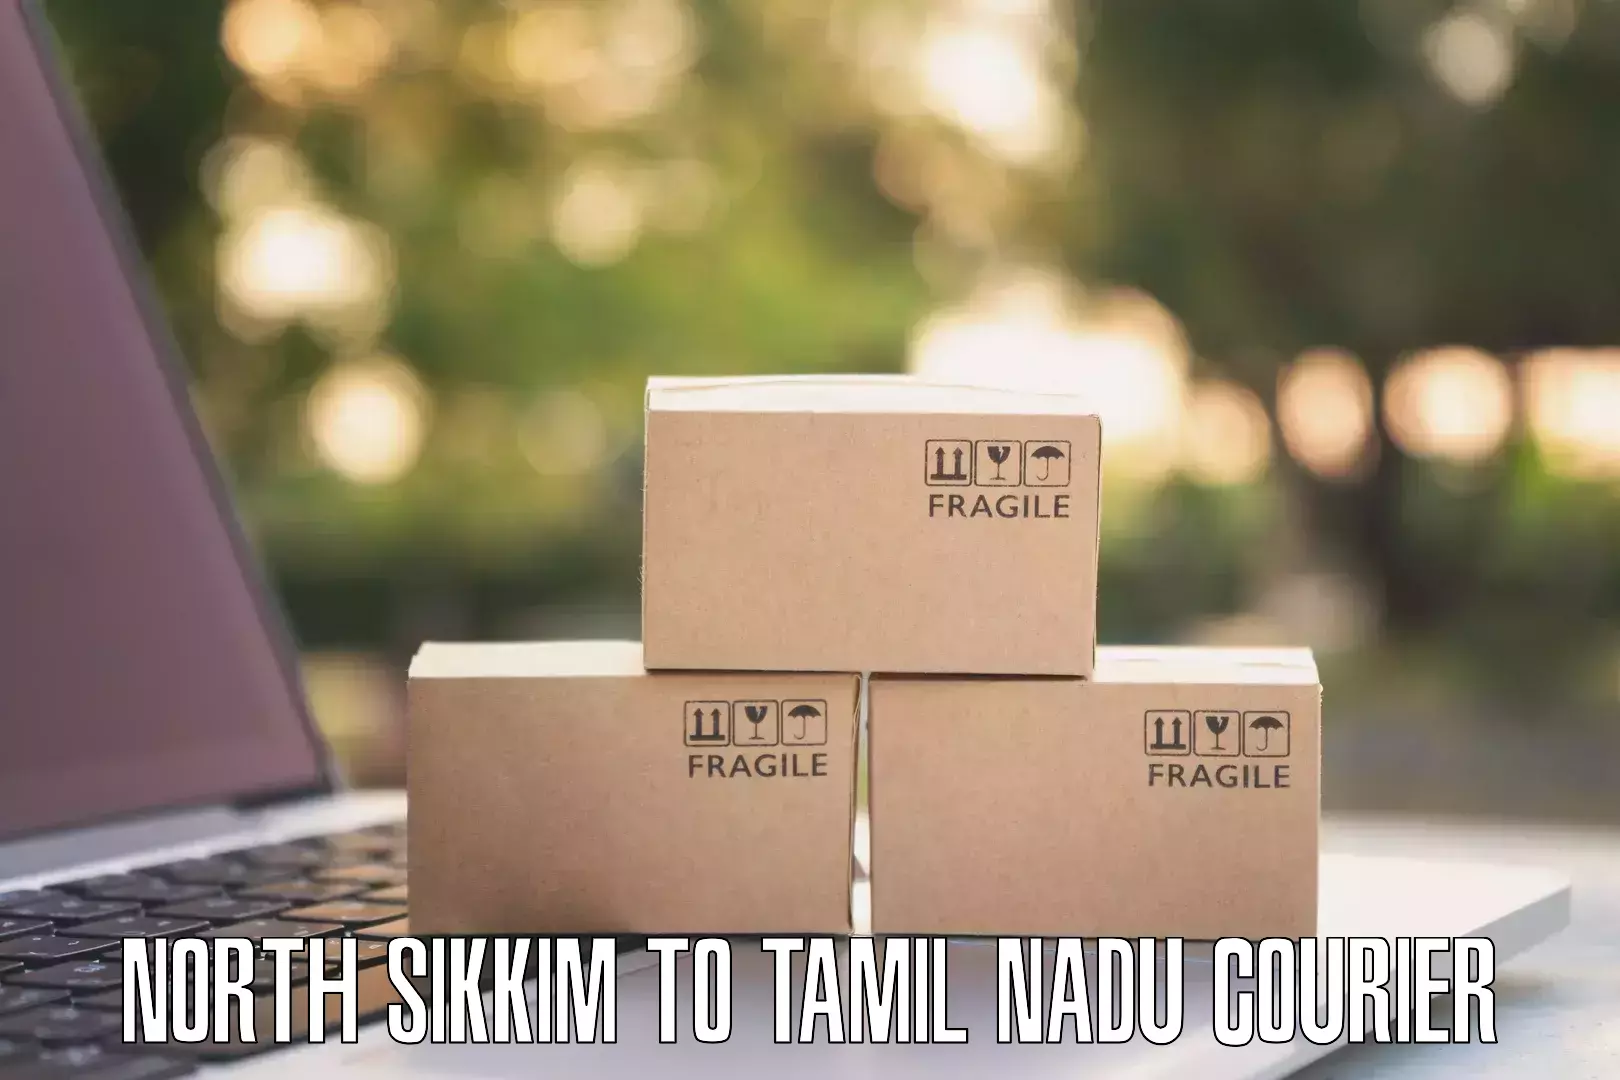 Nationwide shipping coverage North Sikkim to Ennore Port Chennai